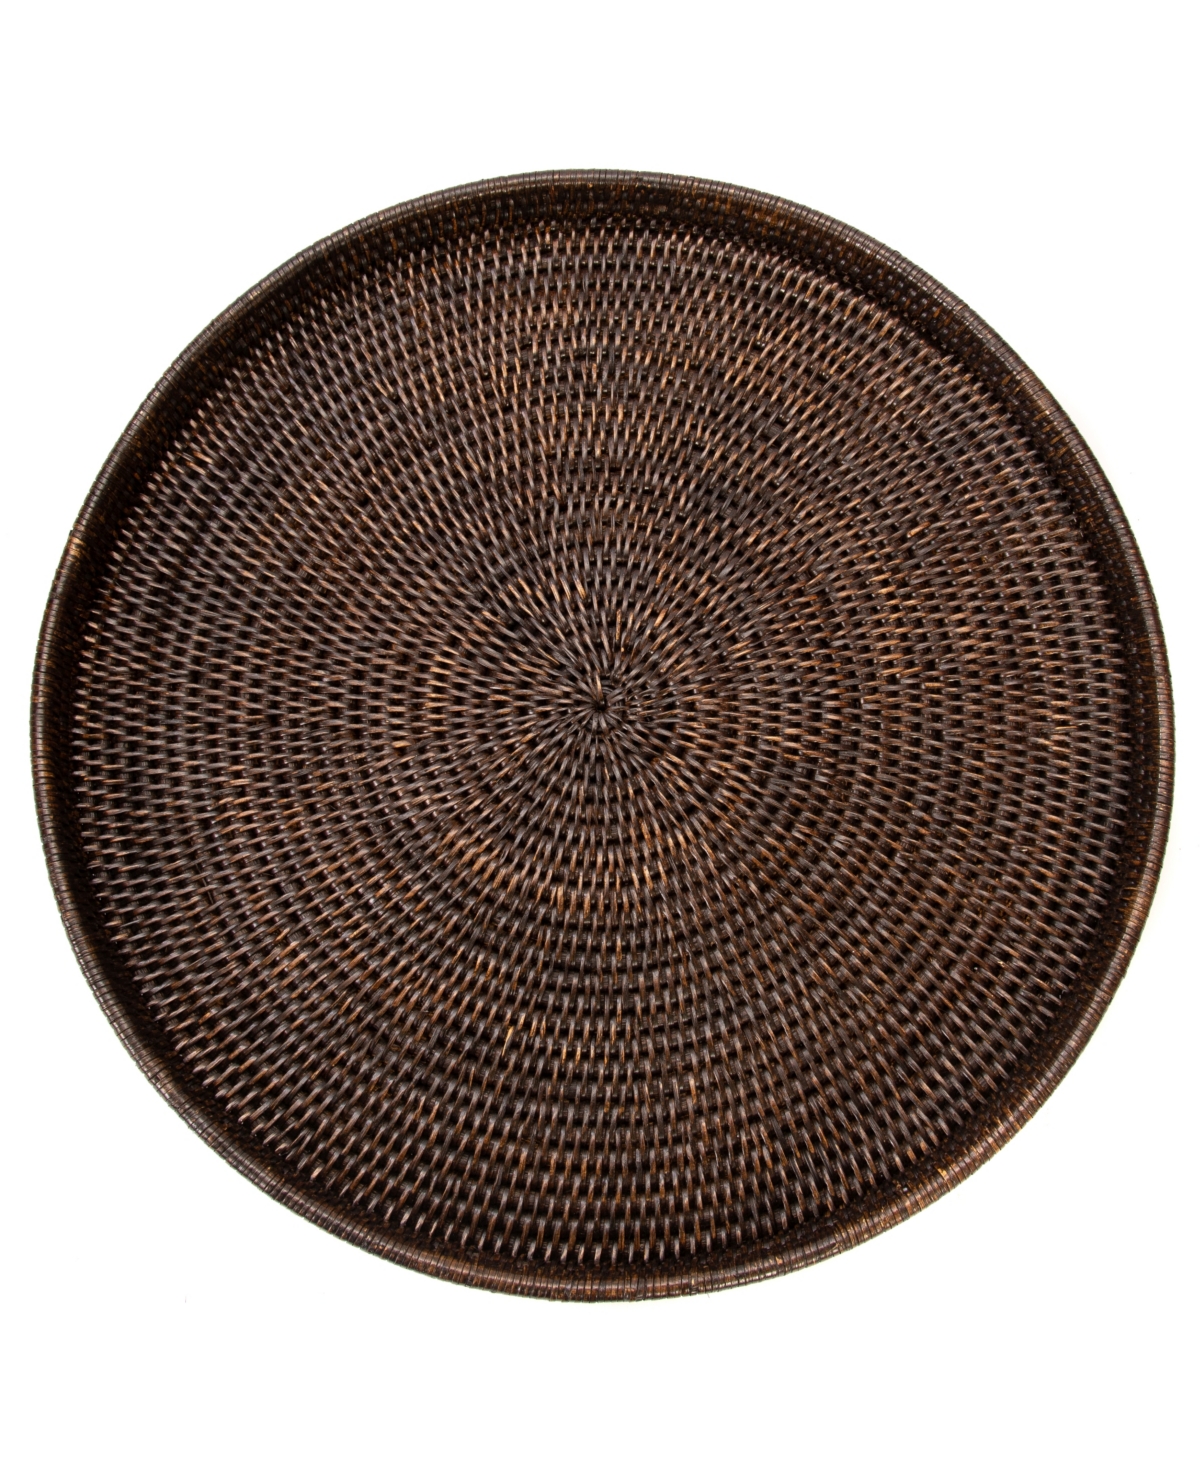 Shop Artifacts Trading Company Artifacts Rattan Round Tray In Coffee Bean